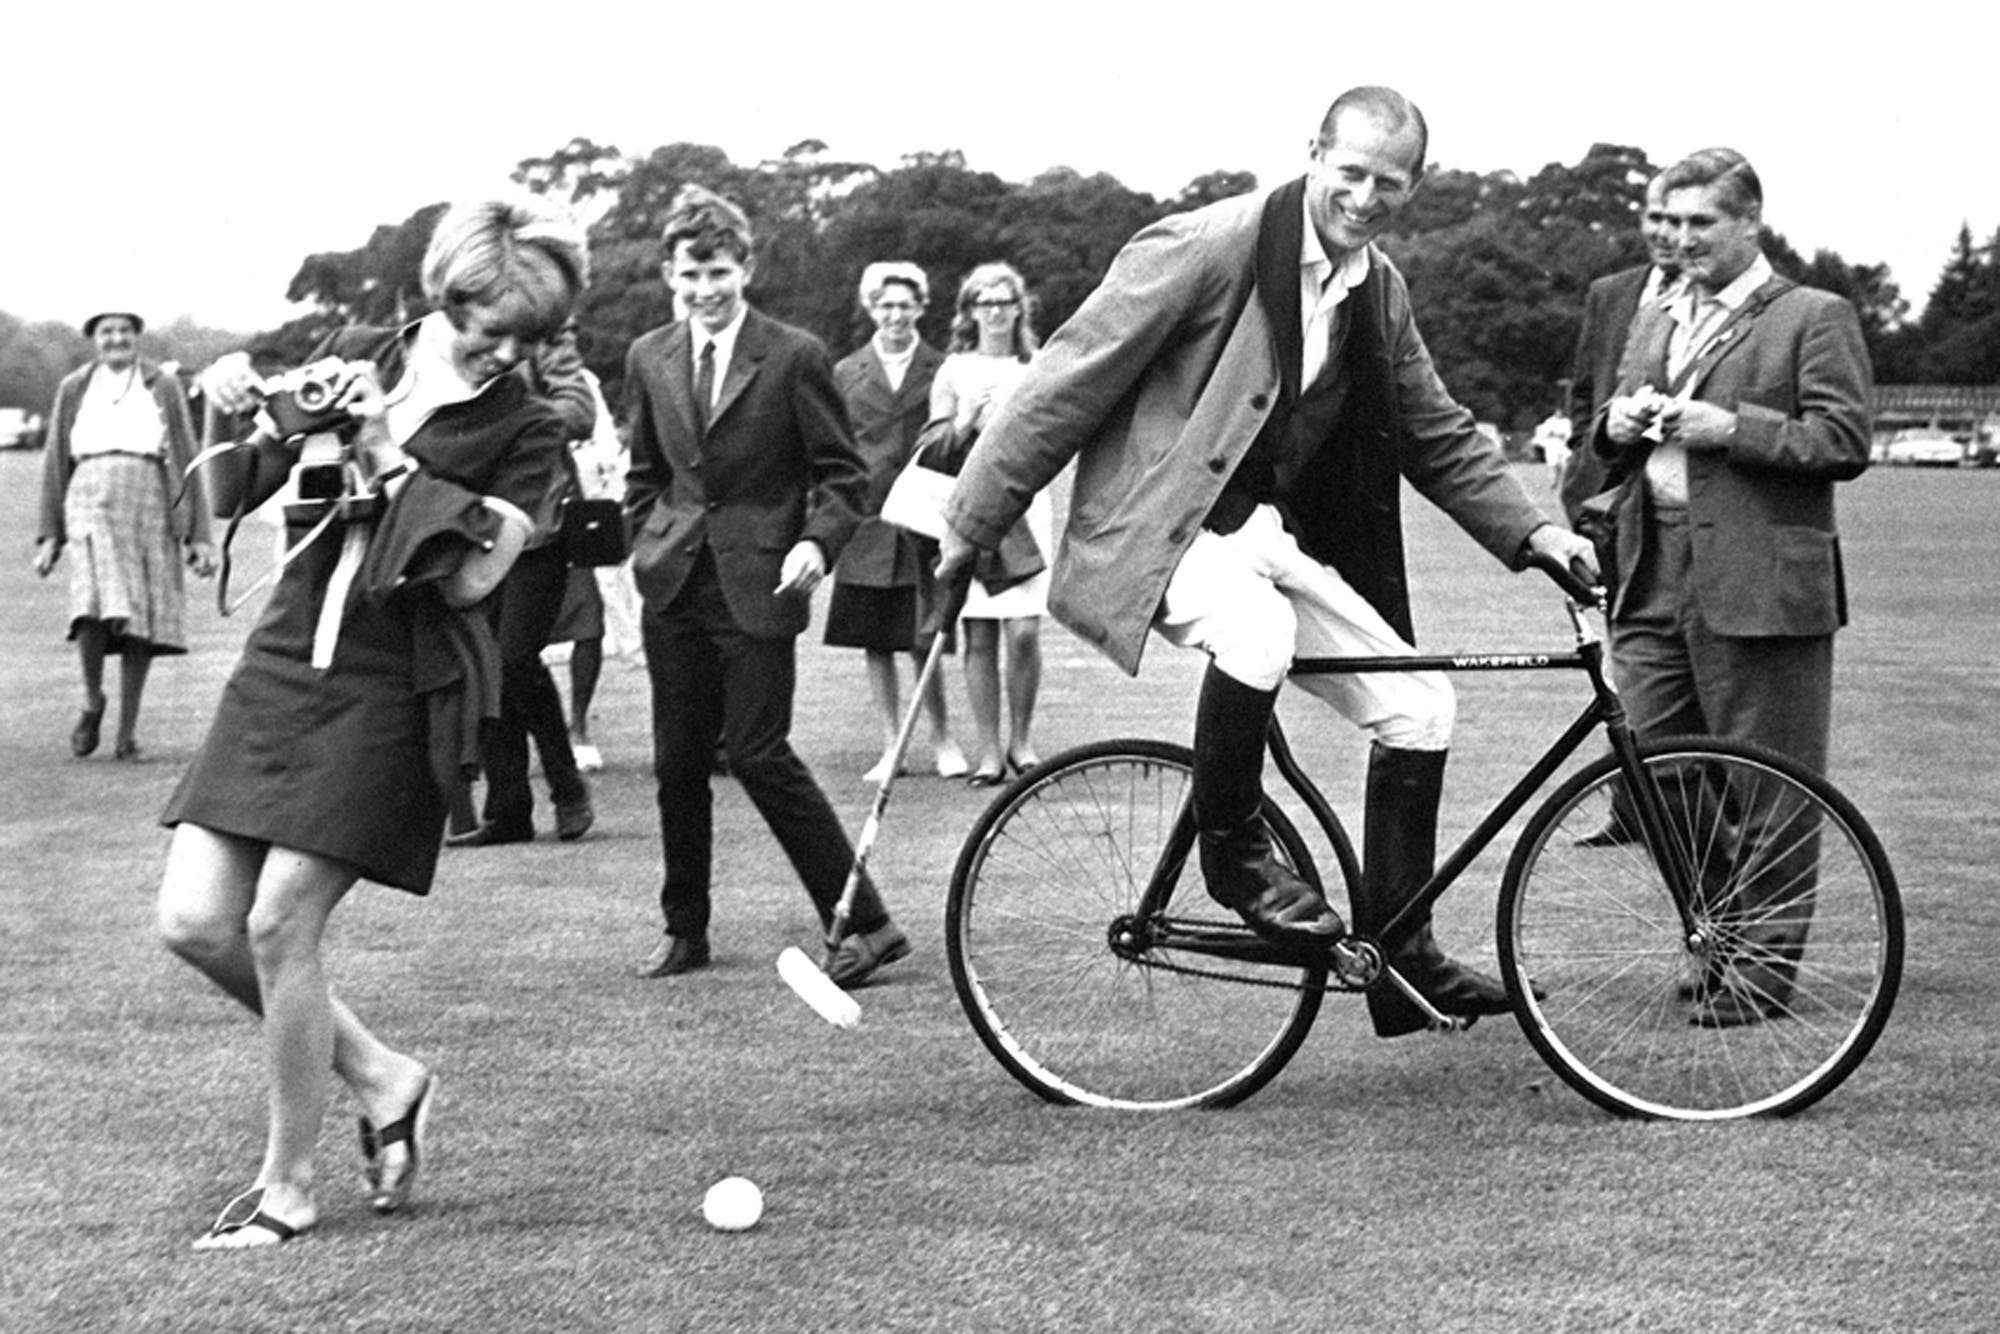 Prince Philip in 1964 after one of his beloved polo games.  Image credit: Getty Images